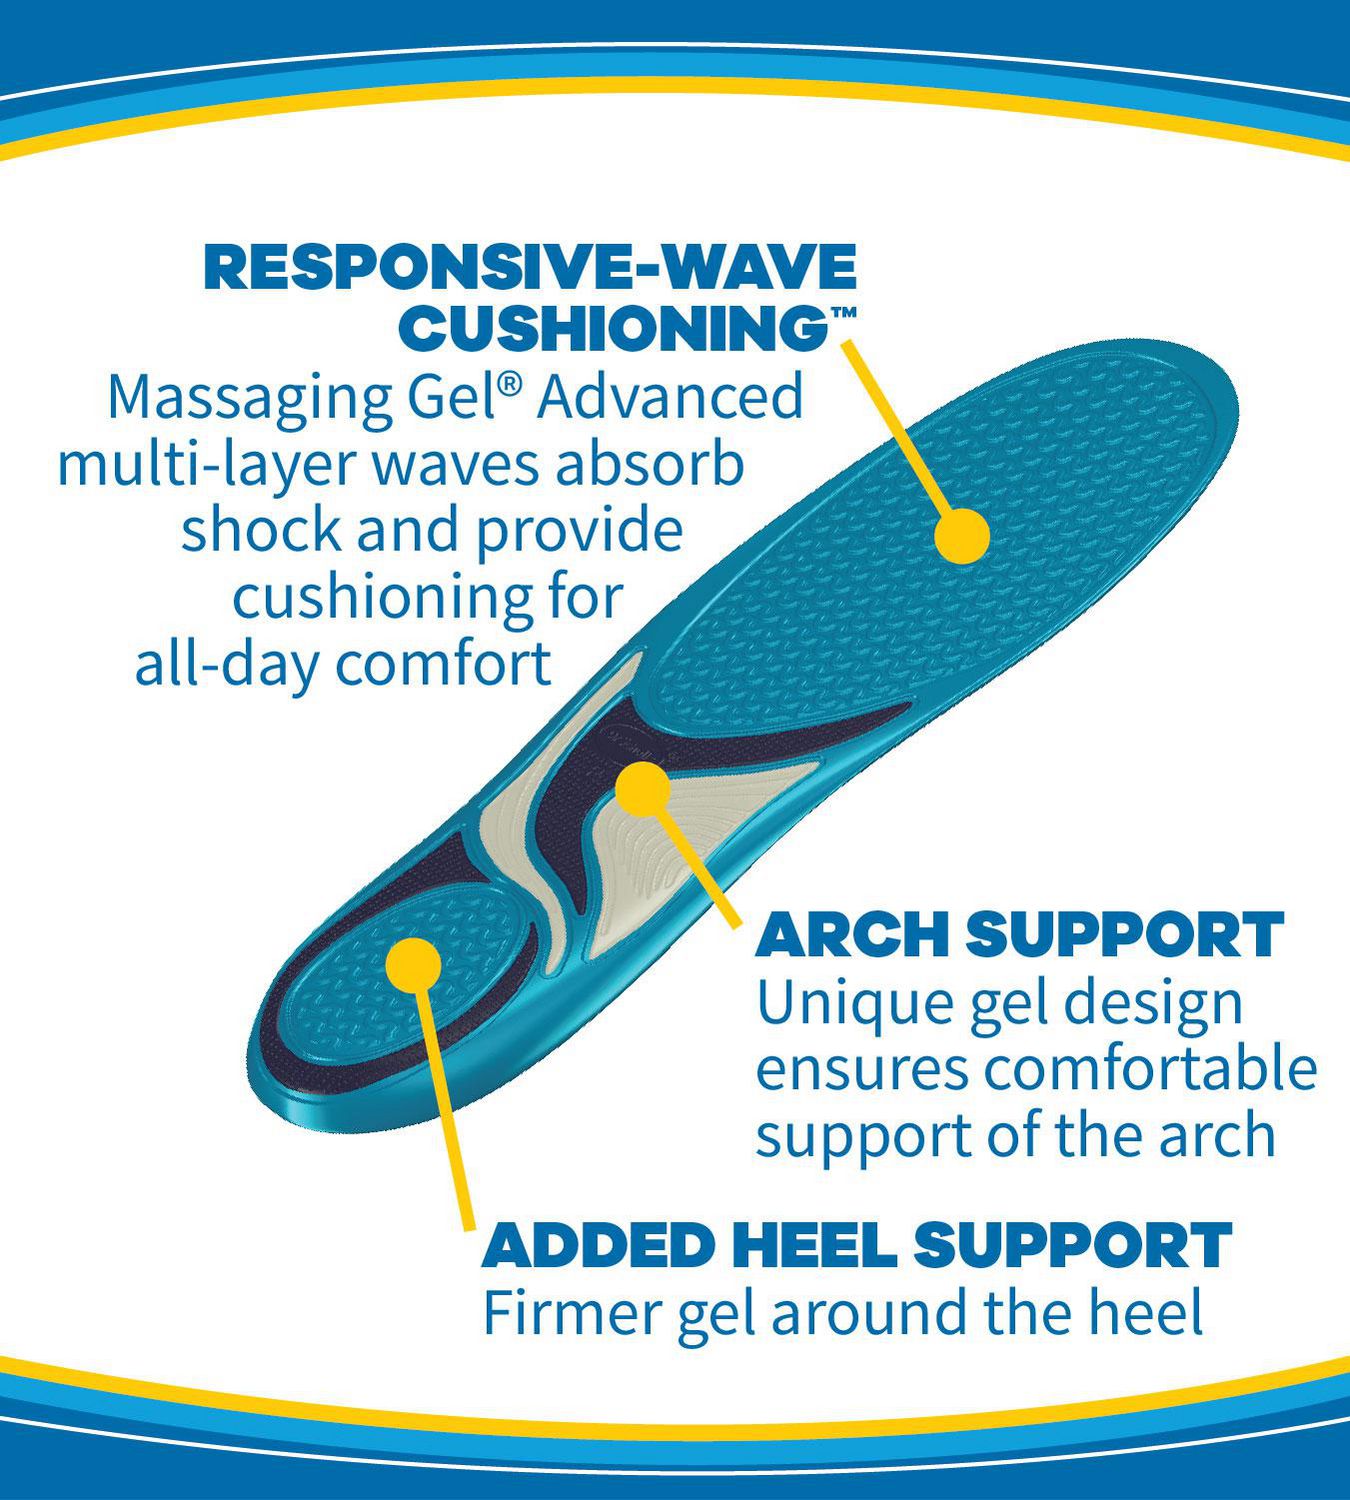 Dr. Scholl's Work All-Day Superior Comfort Insoles (with) Massaging Gel®,  Men, 1 Pair, Trim to Fit 